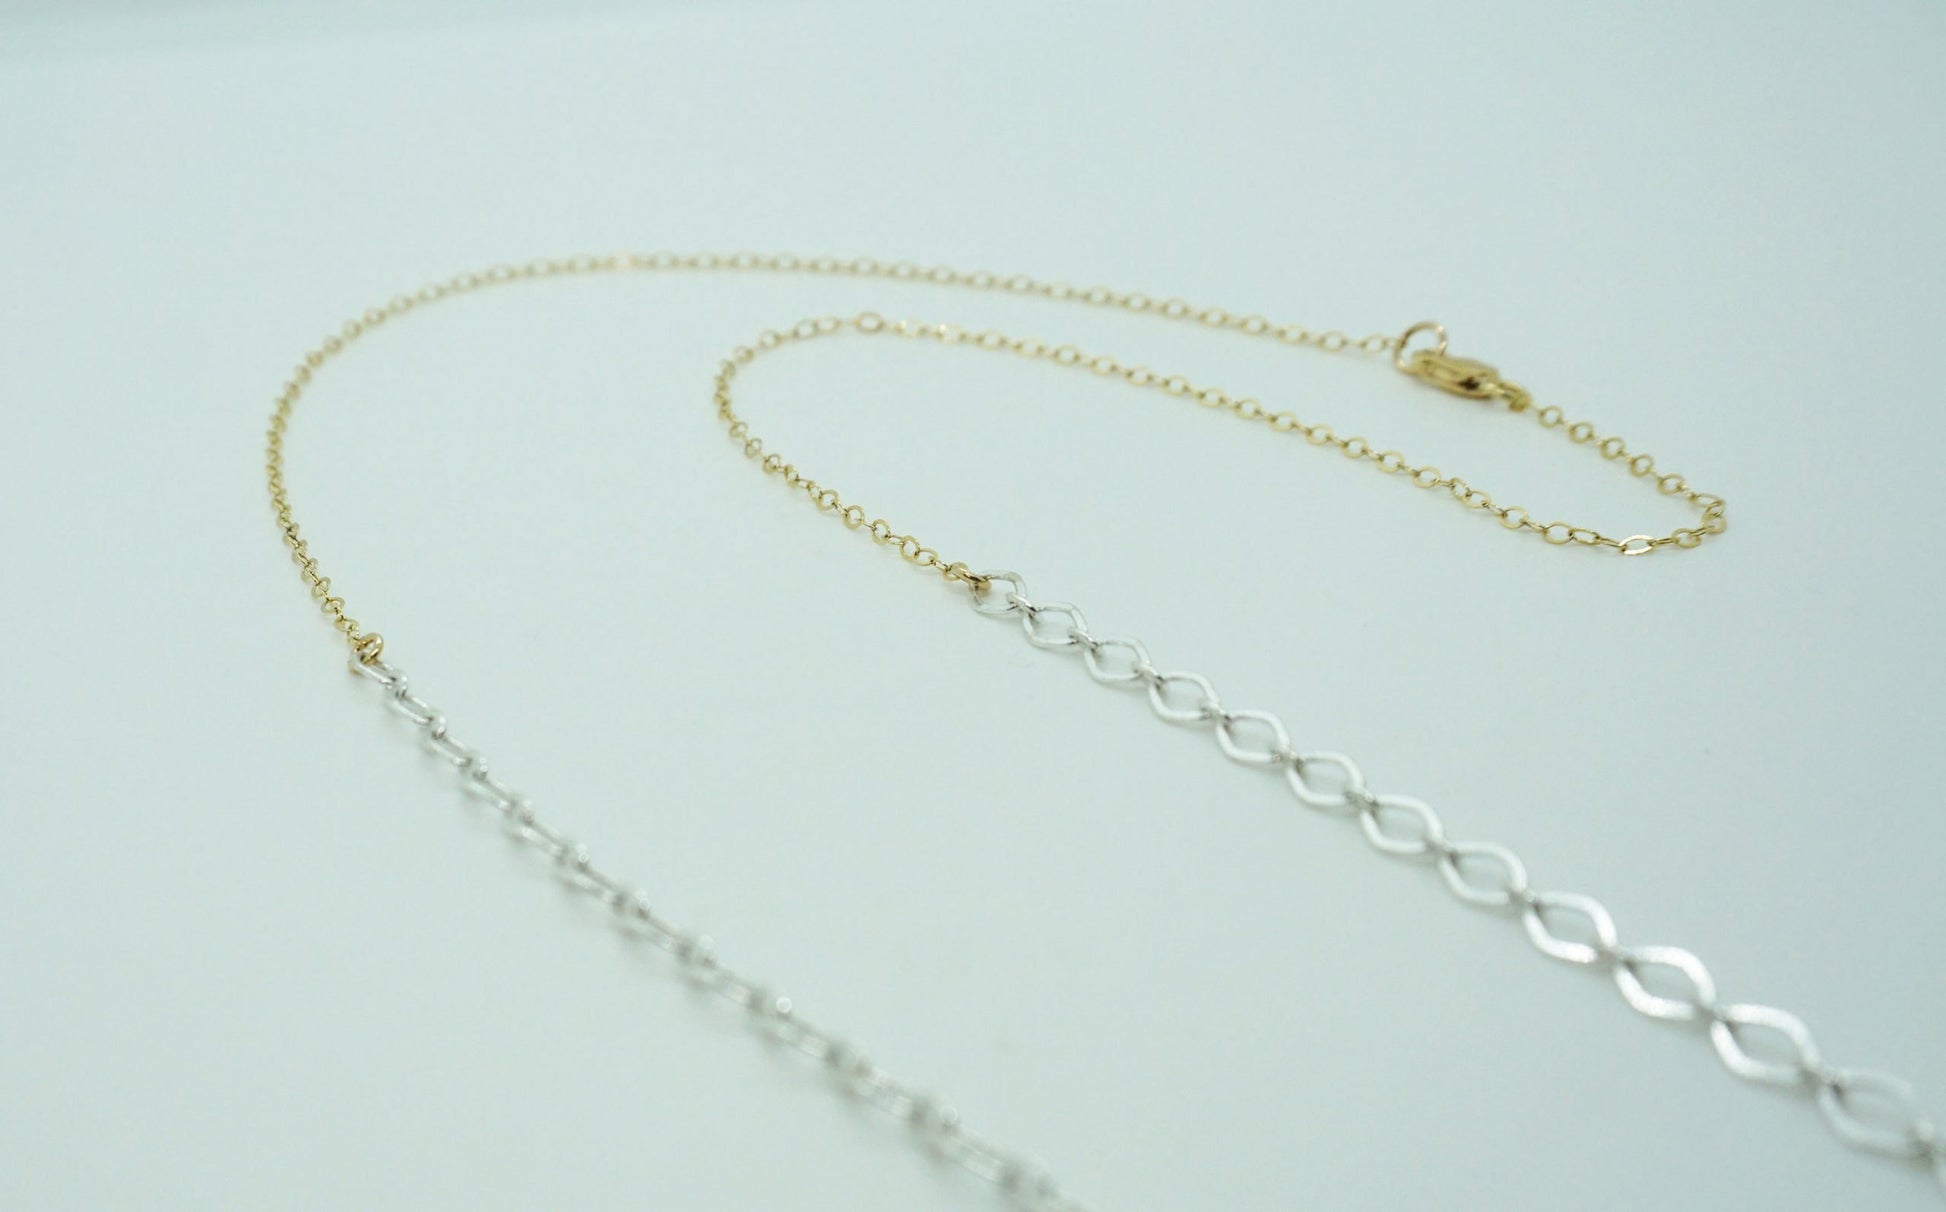 Silver and 14k gold fill chain necklace